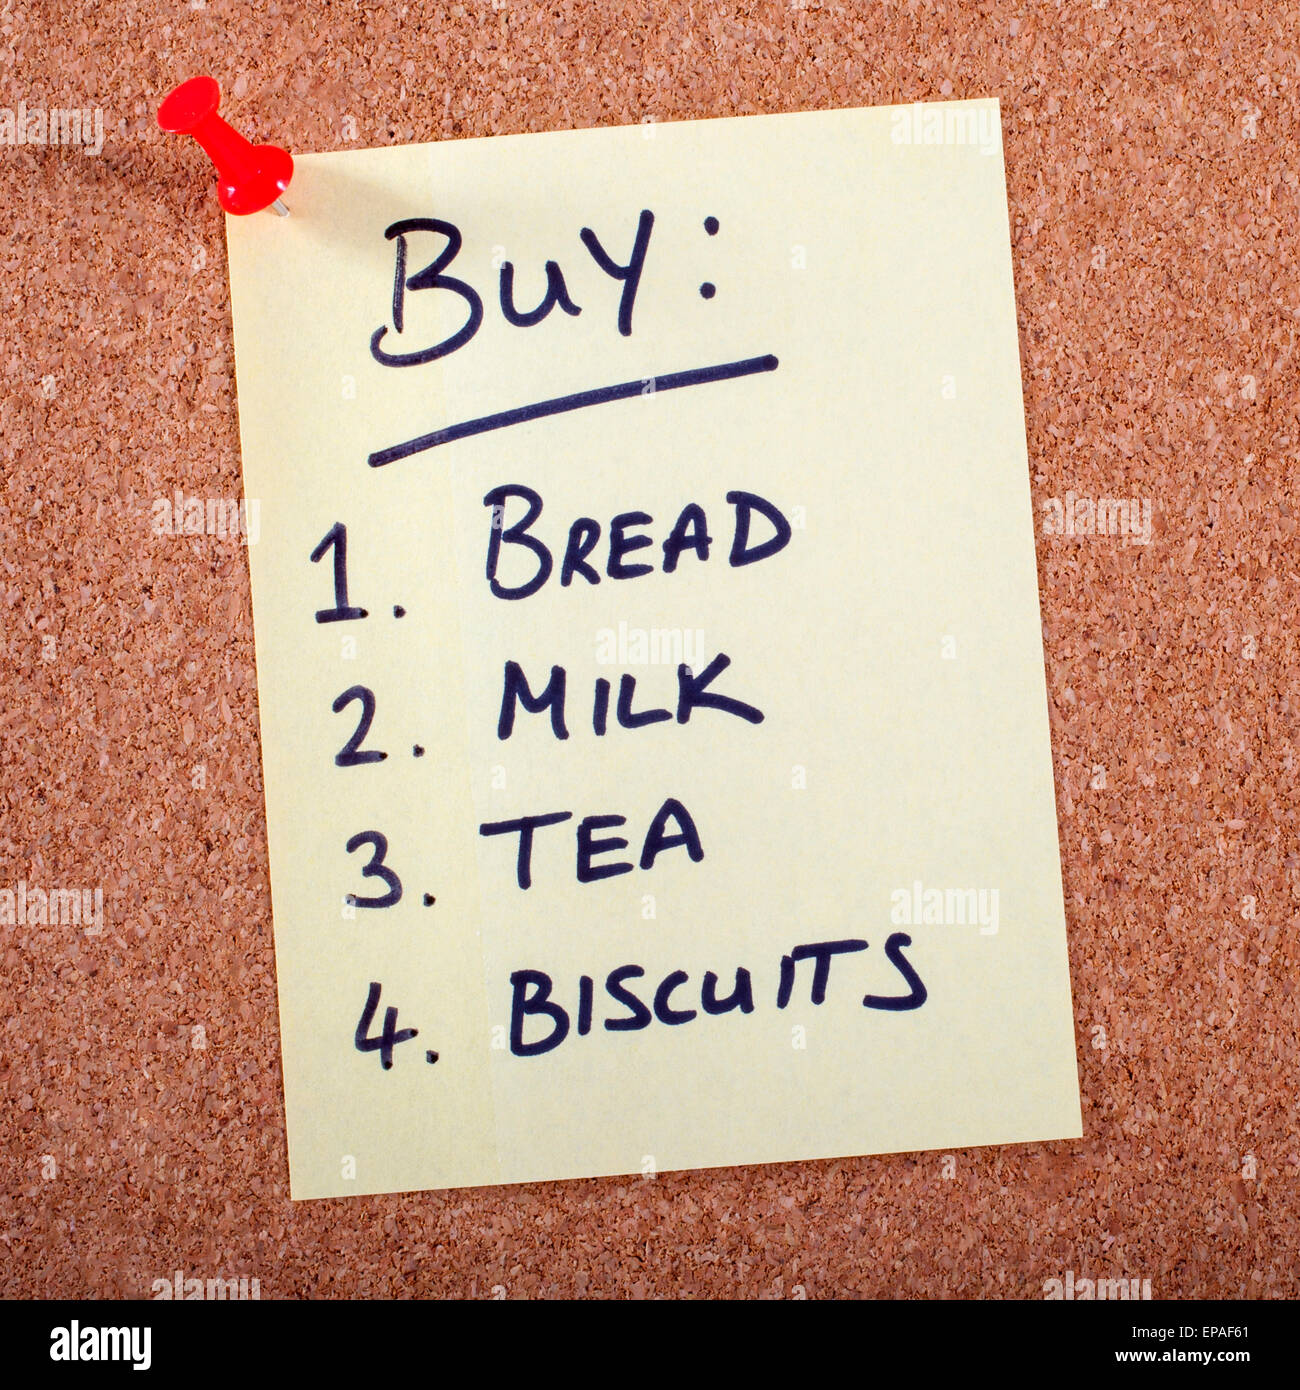 A Shopping List pinned to a Noticeboard. Stock Photo